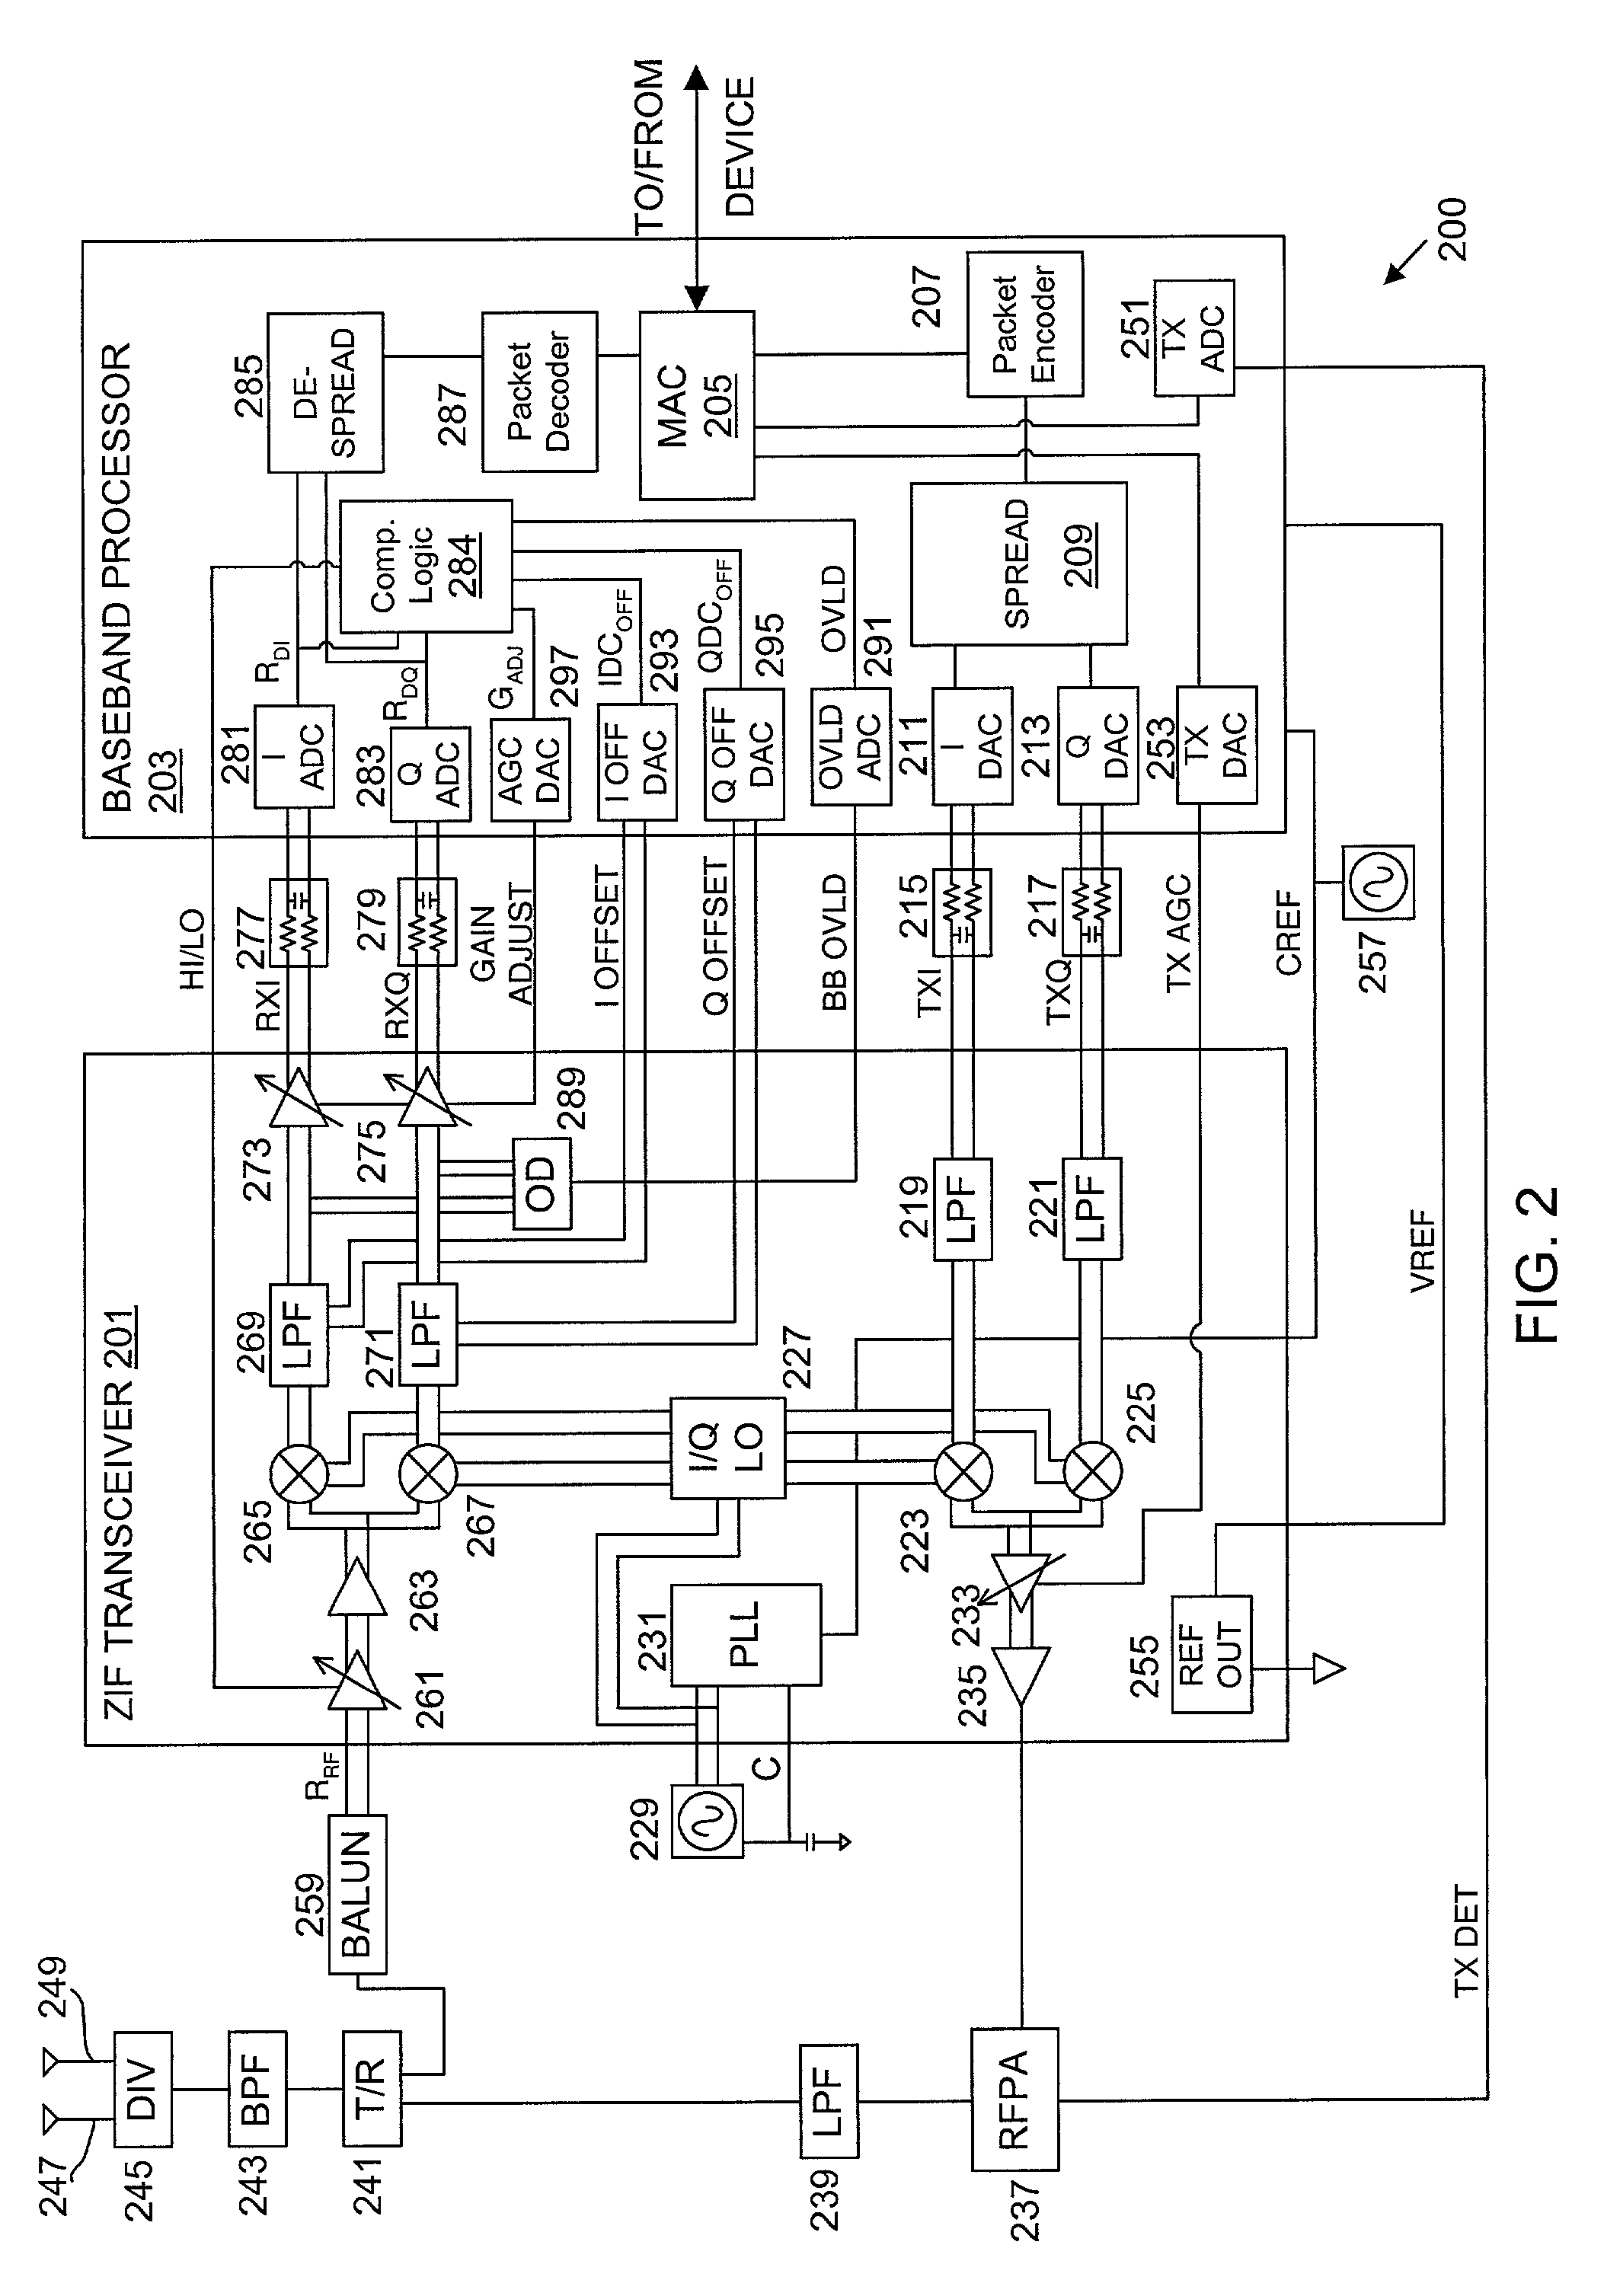 Packet acquisition and channel tracking for a wireless communication device configured in a zero intermediate frequency architecture